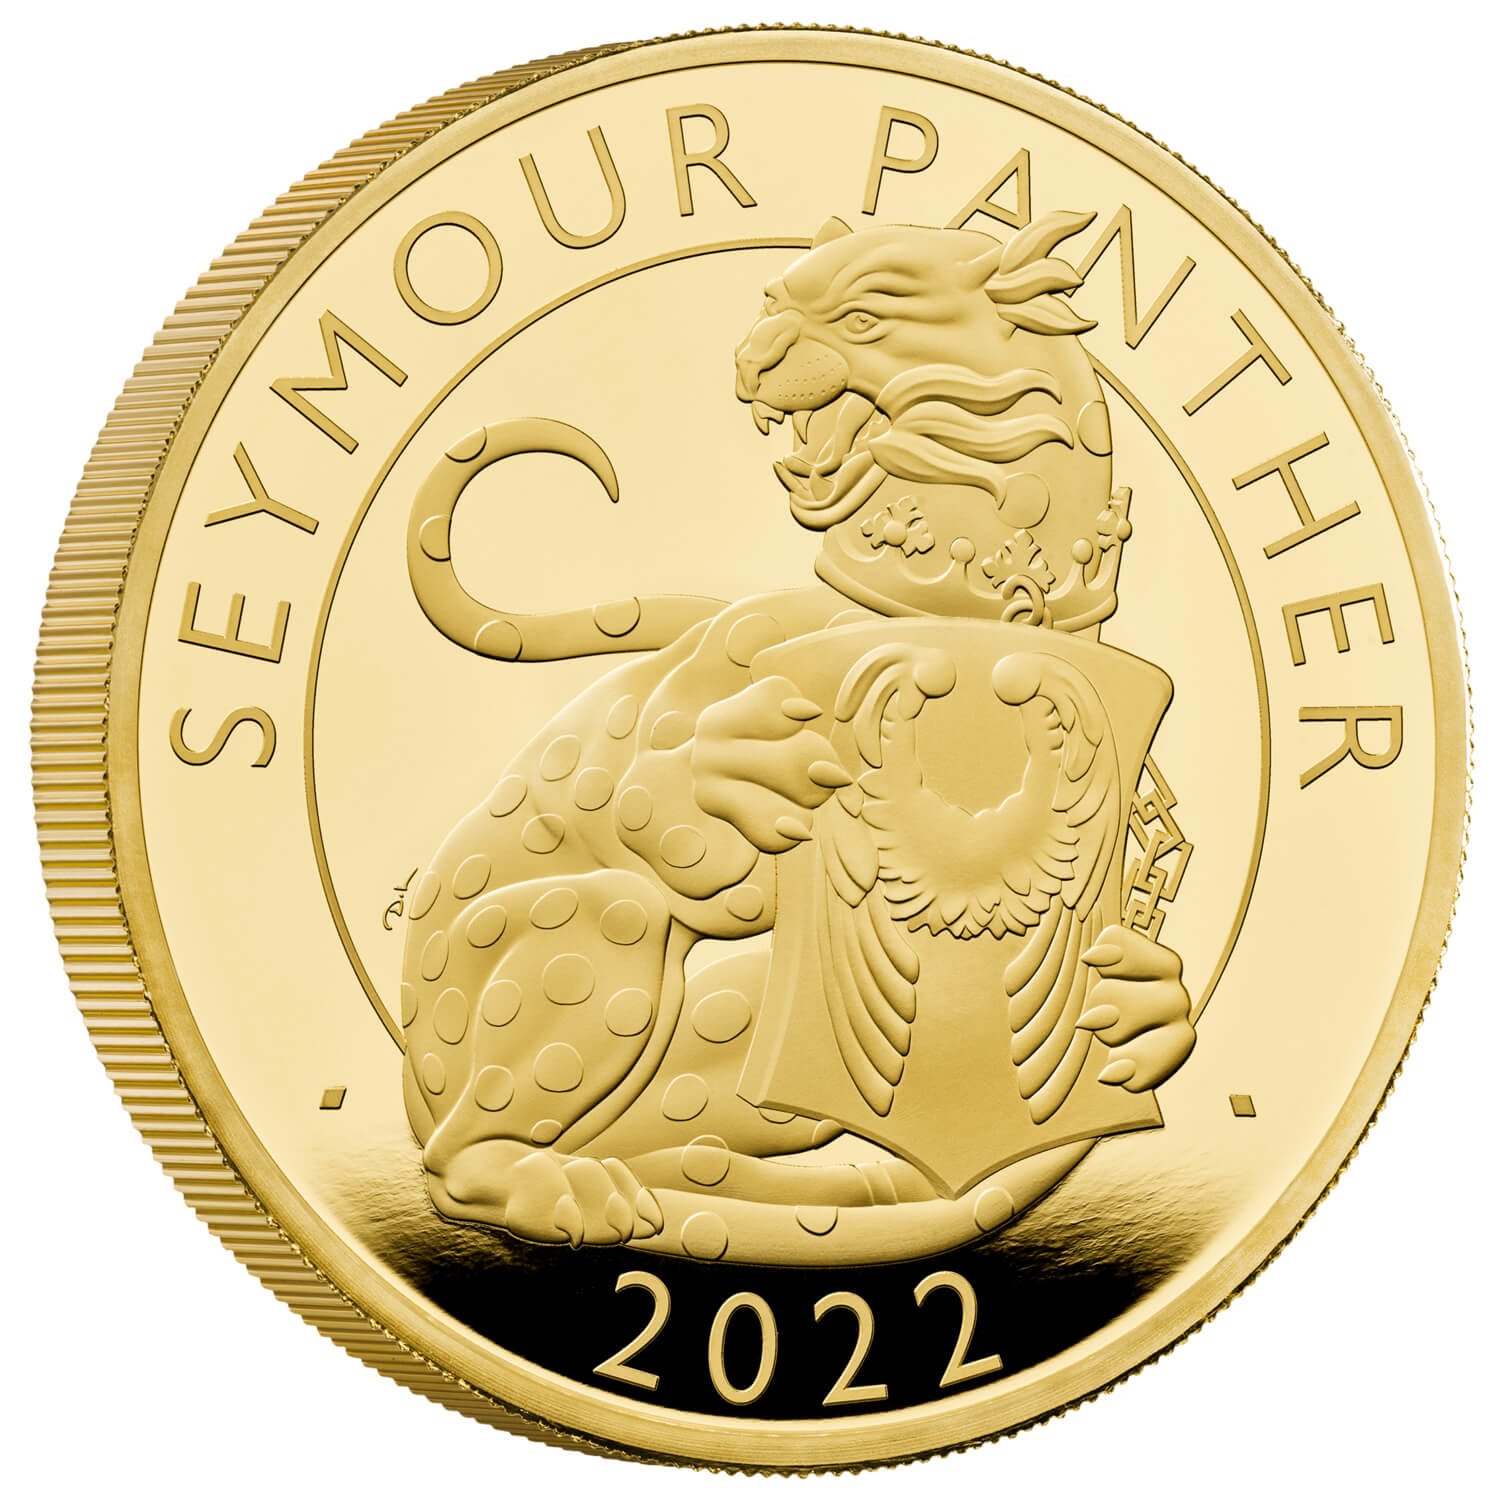 The Seymour Panther Gold Coin